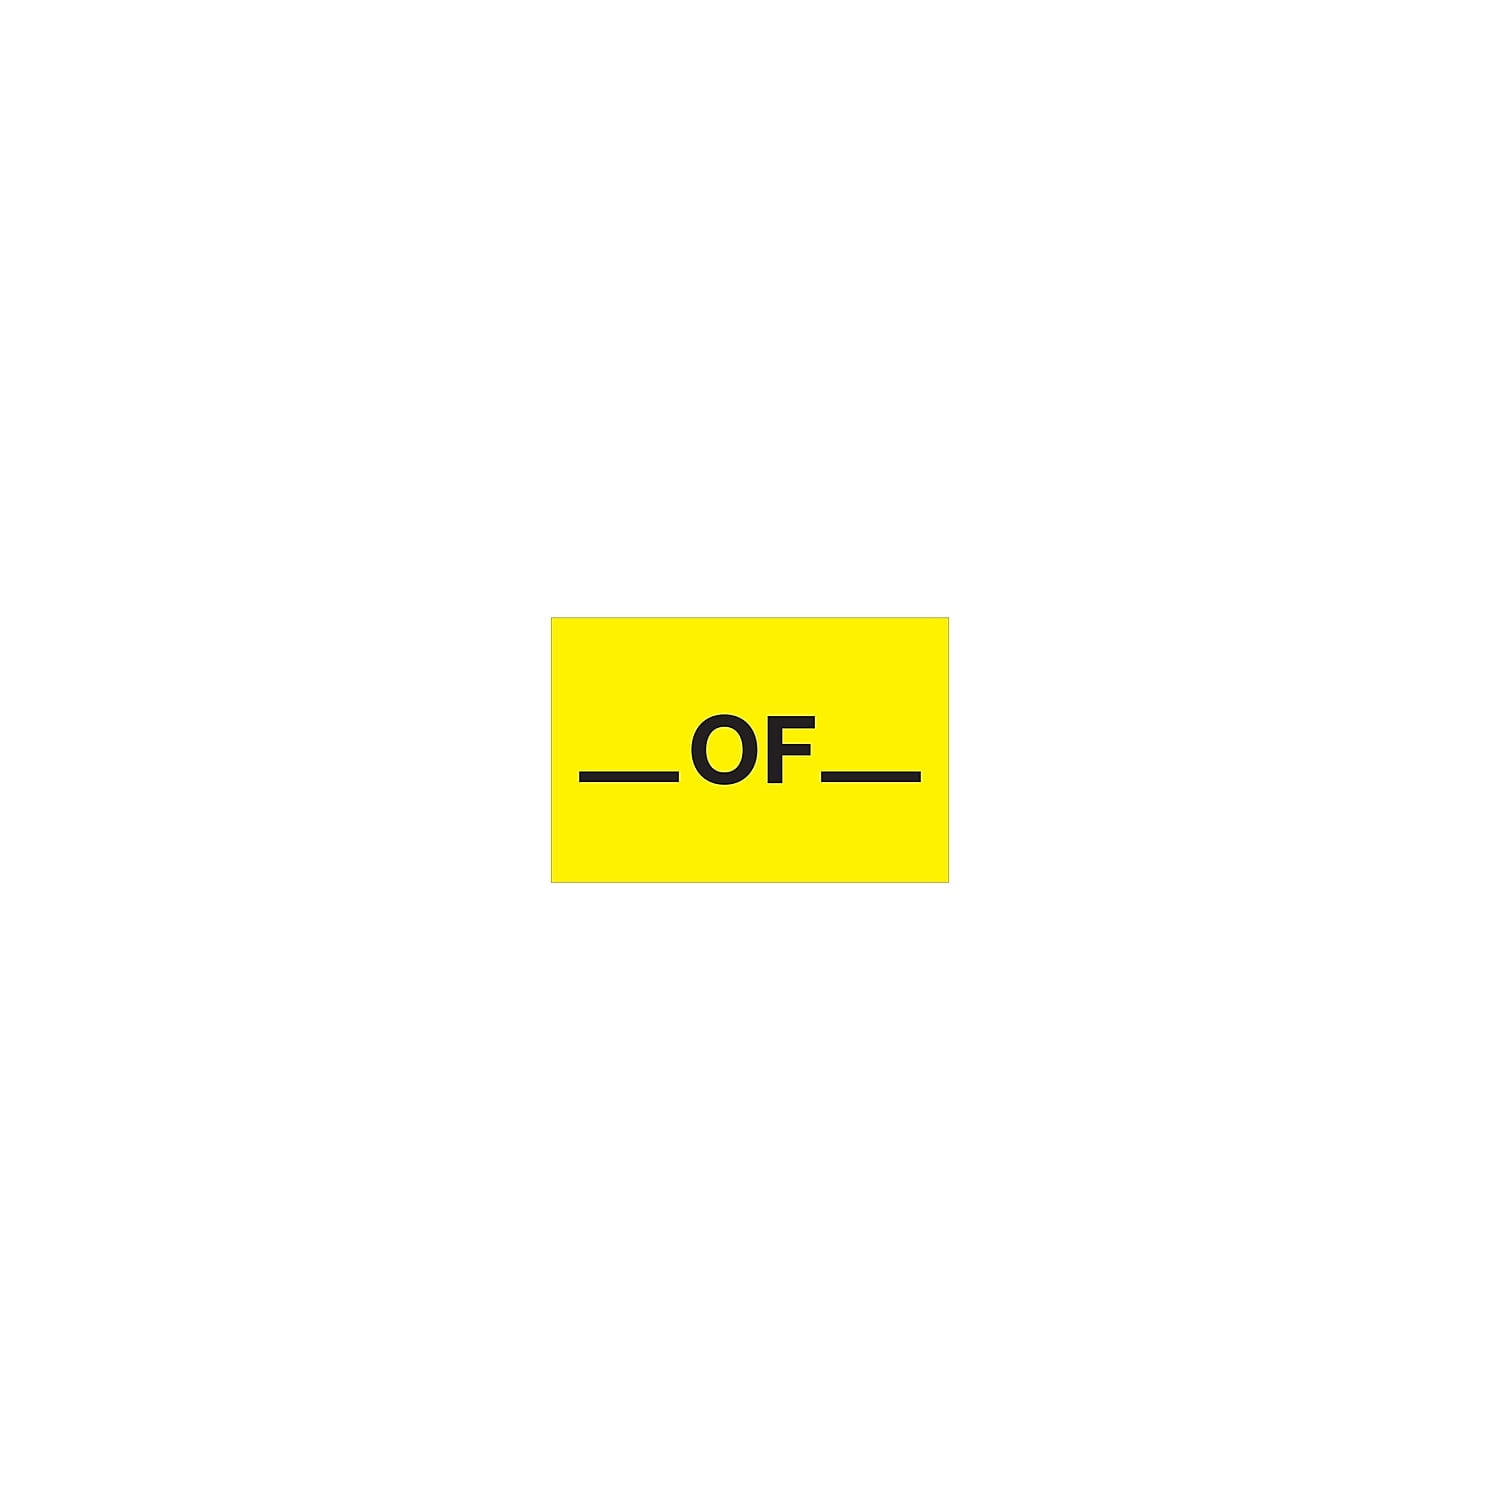 Dl1612 2 X 3 In. Dash Of Labels, Fluorescent Yellow